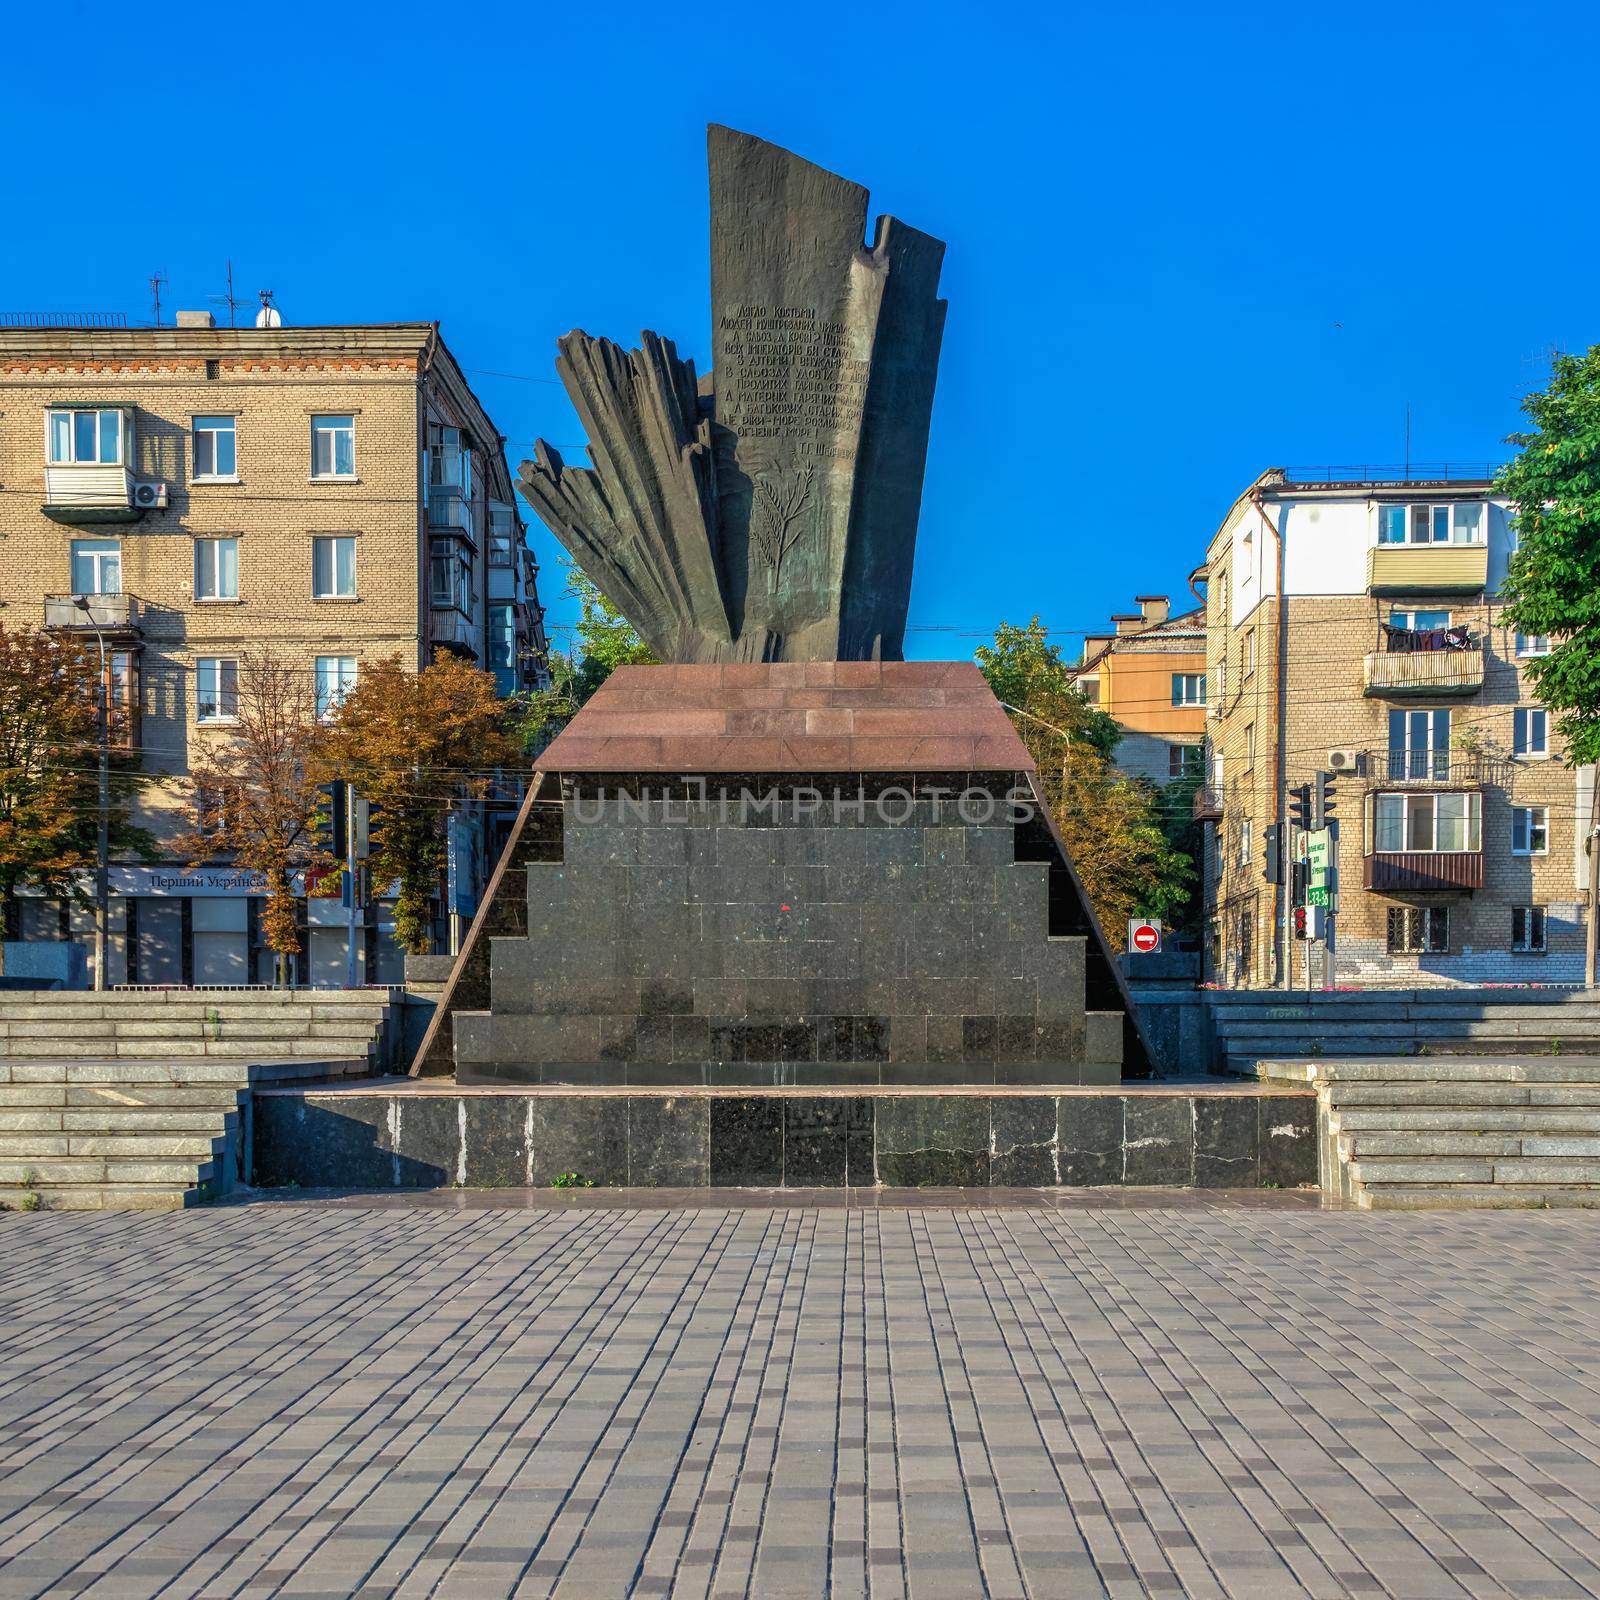 Dnipro, Ukraine 07.18.2020. Monument to the Fallen Afghan Warriors on the Dnipro embankment in Ukraine on a sunny summer day